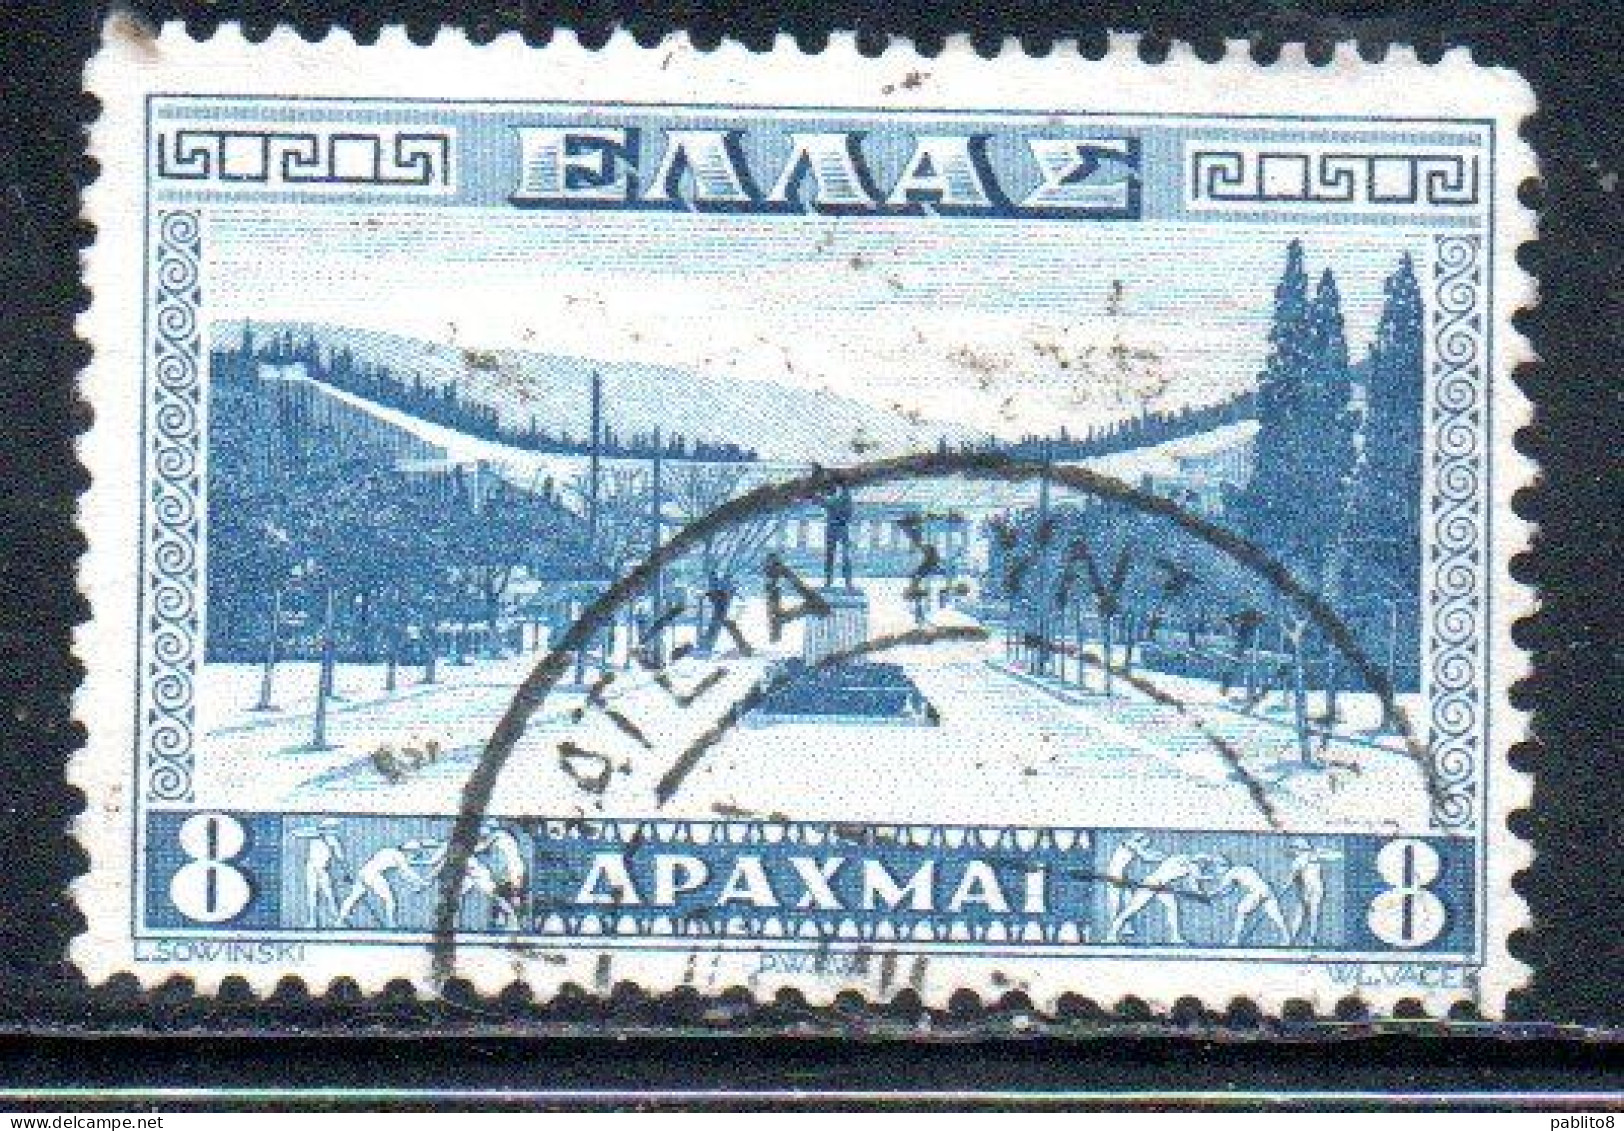 GREECE GRECIA HELLAS 1934 APPROACH TO ATHENS STADIUM 8d USED USATO OBLITERE' - Gebraucht